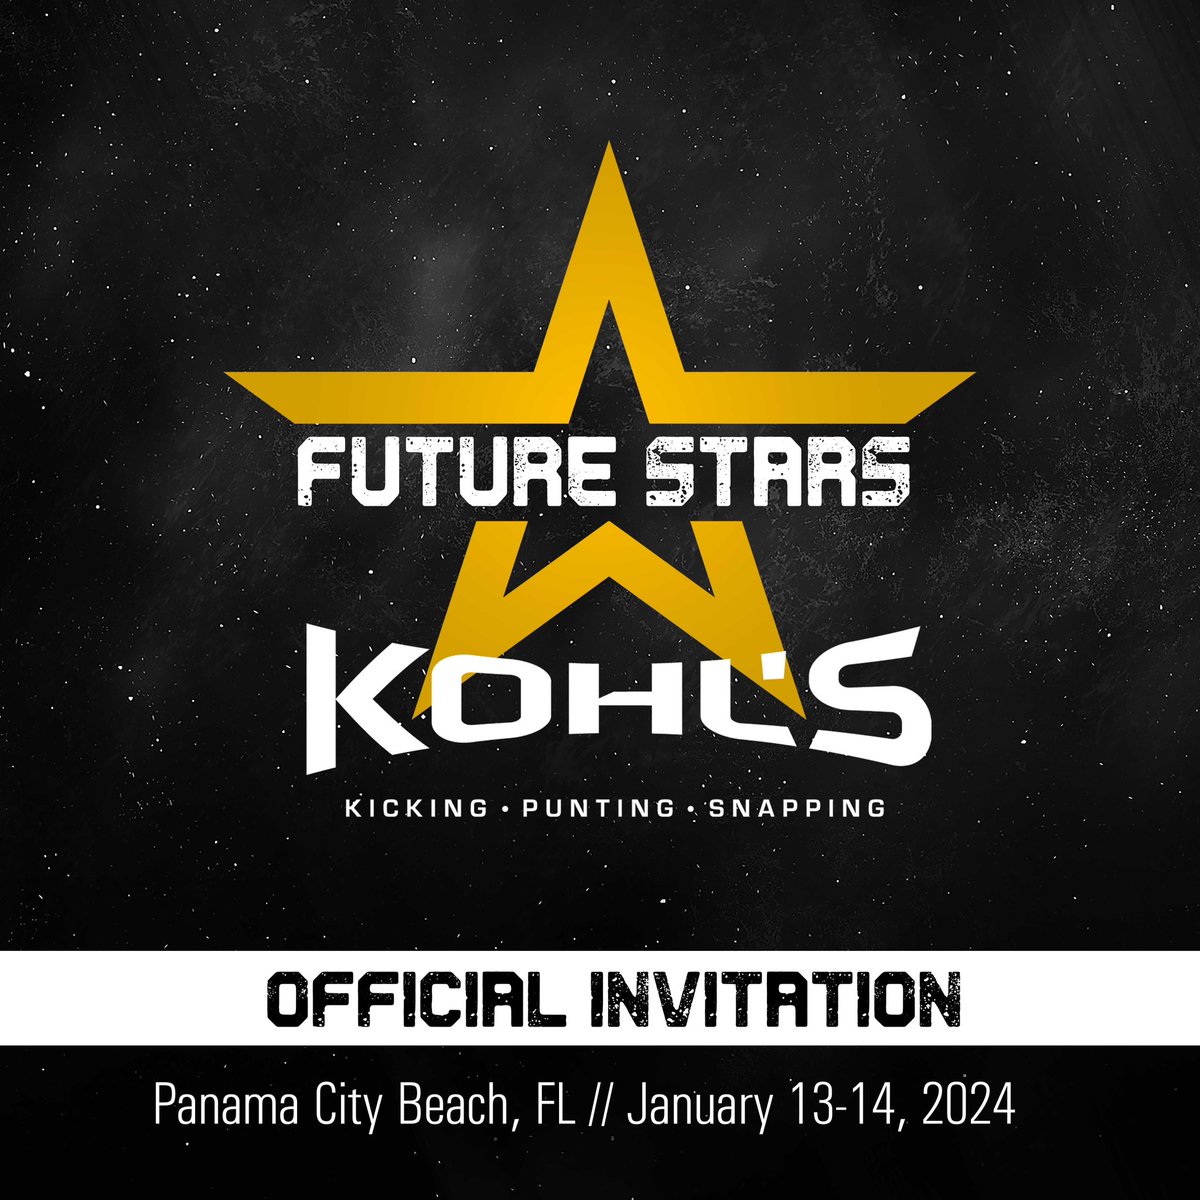 Honored to be invited to attend the Future Stars camp! Registered ✅ Thank you @KohlsKicking for the opportunity! @KelvisWhite @Coach_BYoung @Coachjb_10 @BJHS_Football @BJRecruiting @AL7AFootball @PrepRedzoneAL